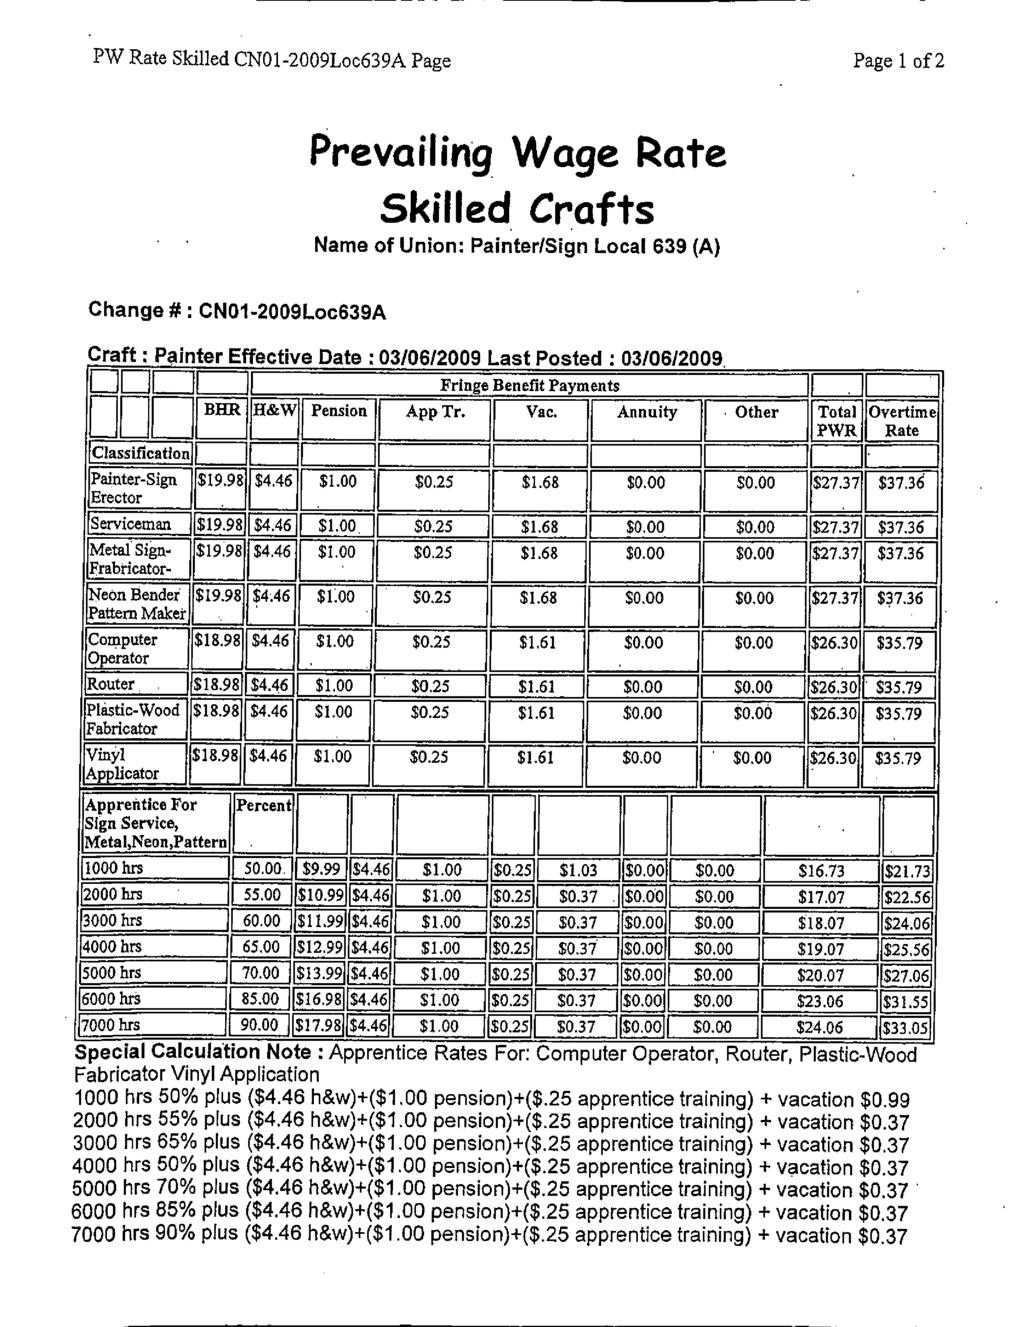 PW Rate Skilled CNO1-2009Loc639A Page Page 1 of 2 Prevailing Wage Rate Skilled Crafts Name of Union: Painter/Sign Local 639 (A) Change # CNO1-2009Loc639A Craft Painter Effective Date : 03/0612009